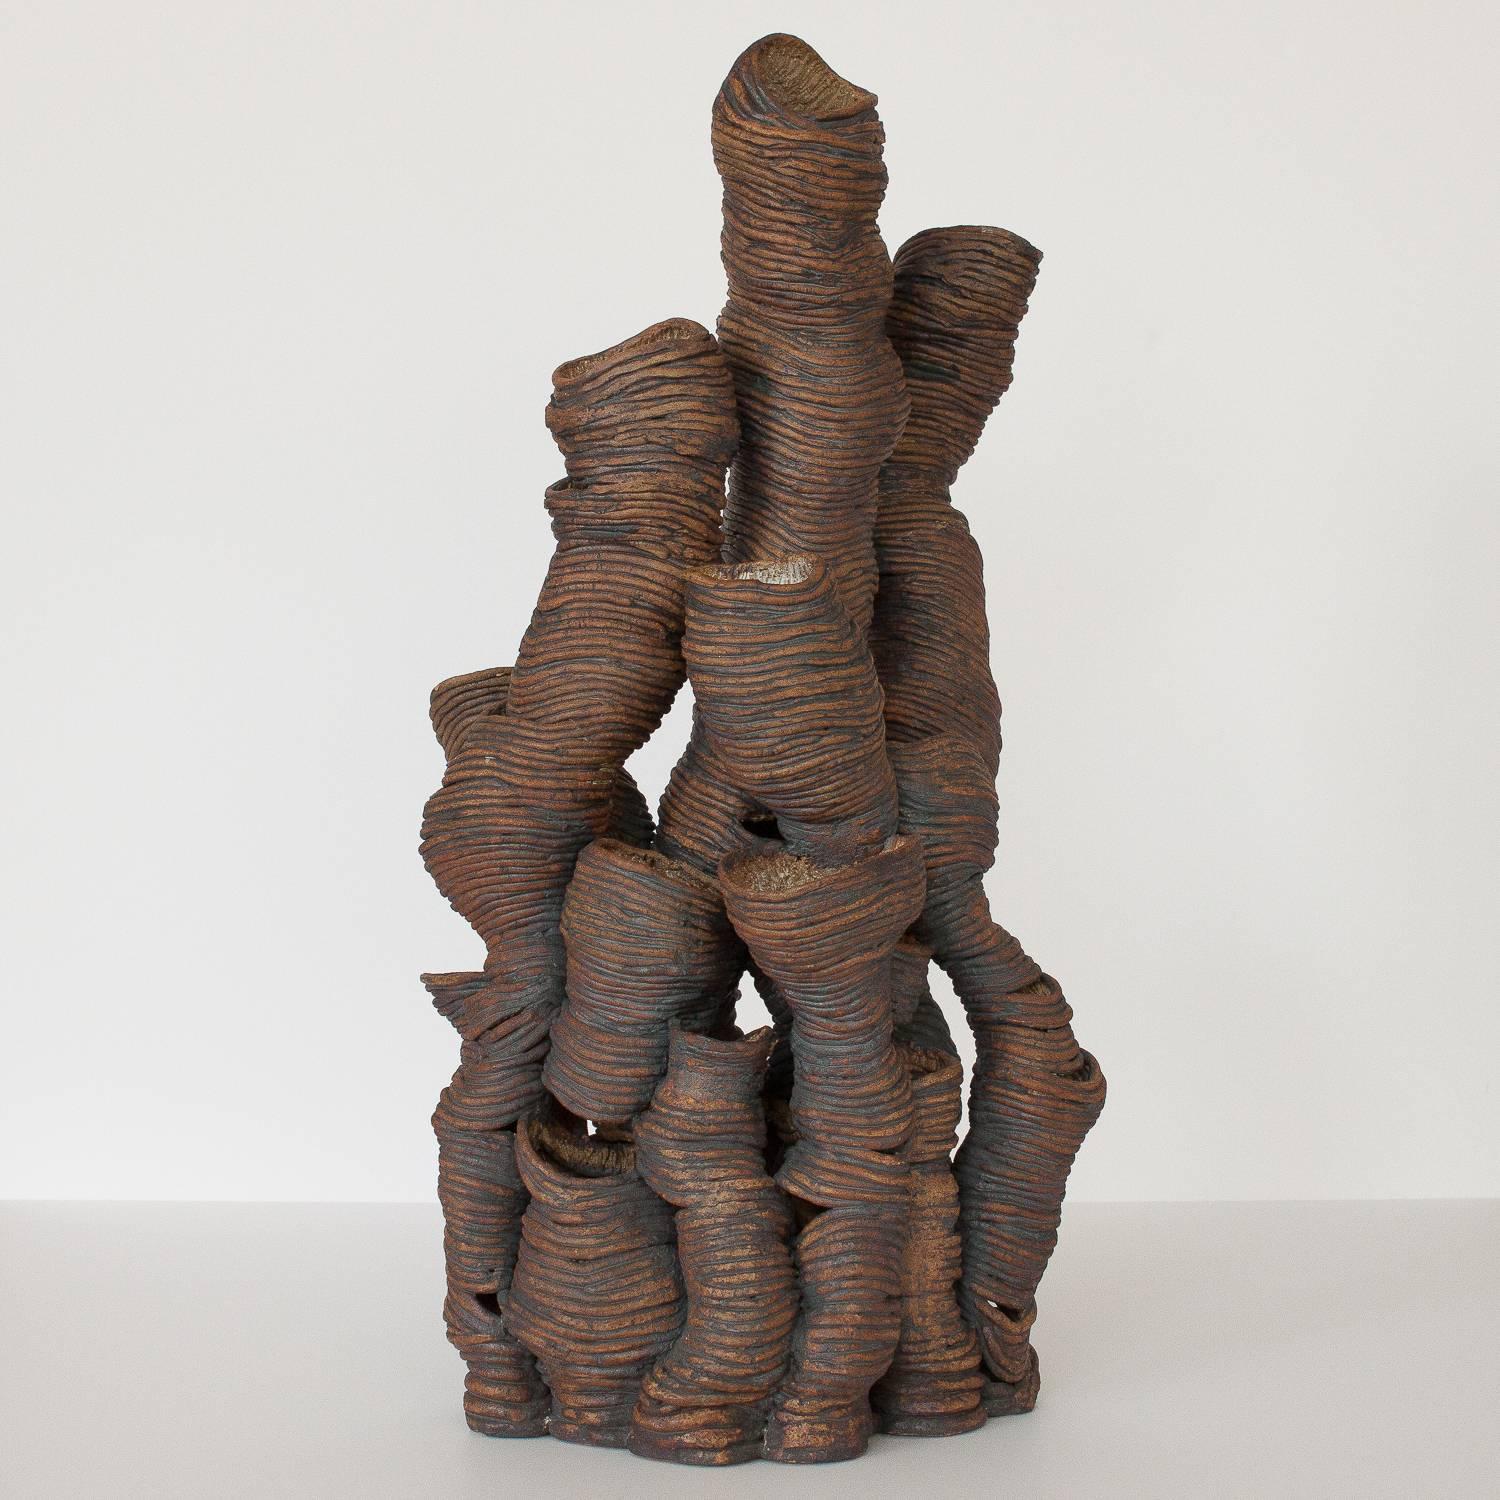 Monumental 28" tall studio pottery coil sculpture. Abstract organic form. Brown and black glaze on exterior with white and natural glaze on textured interior. Unmarked.